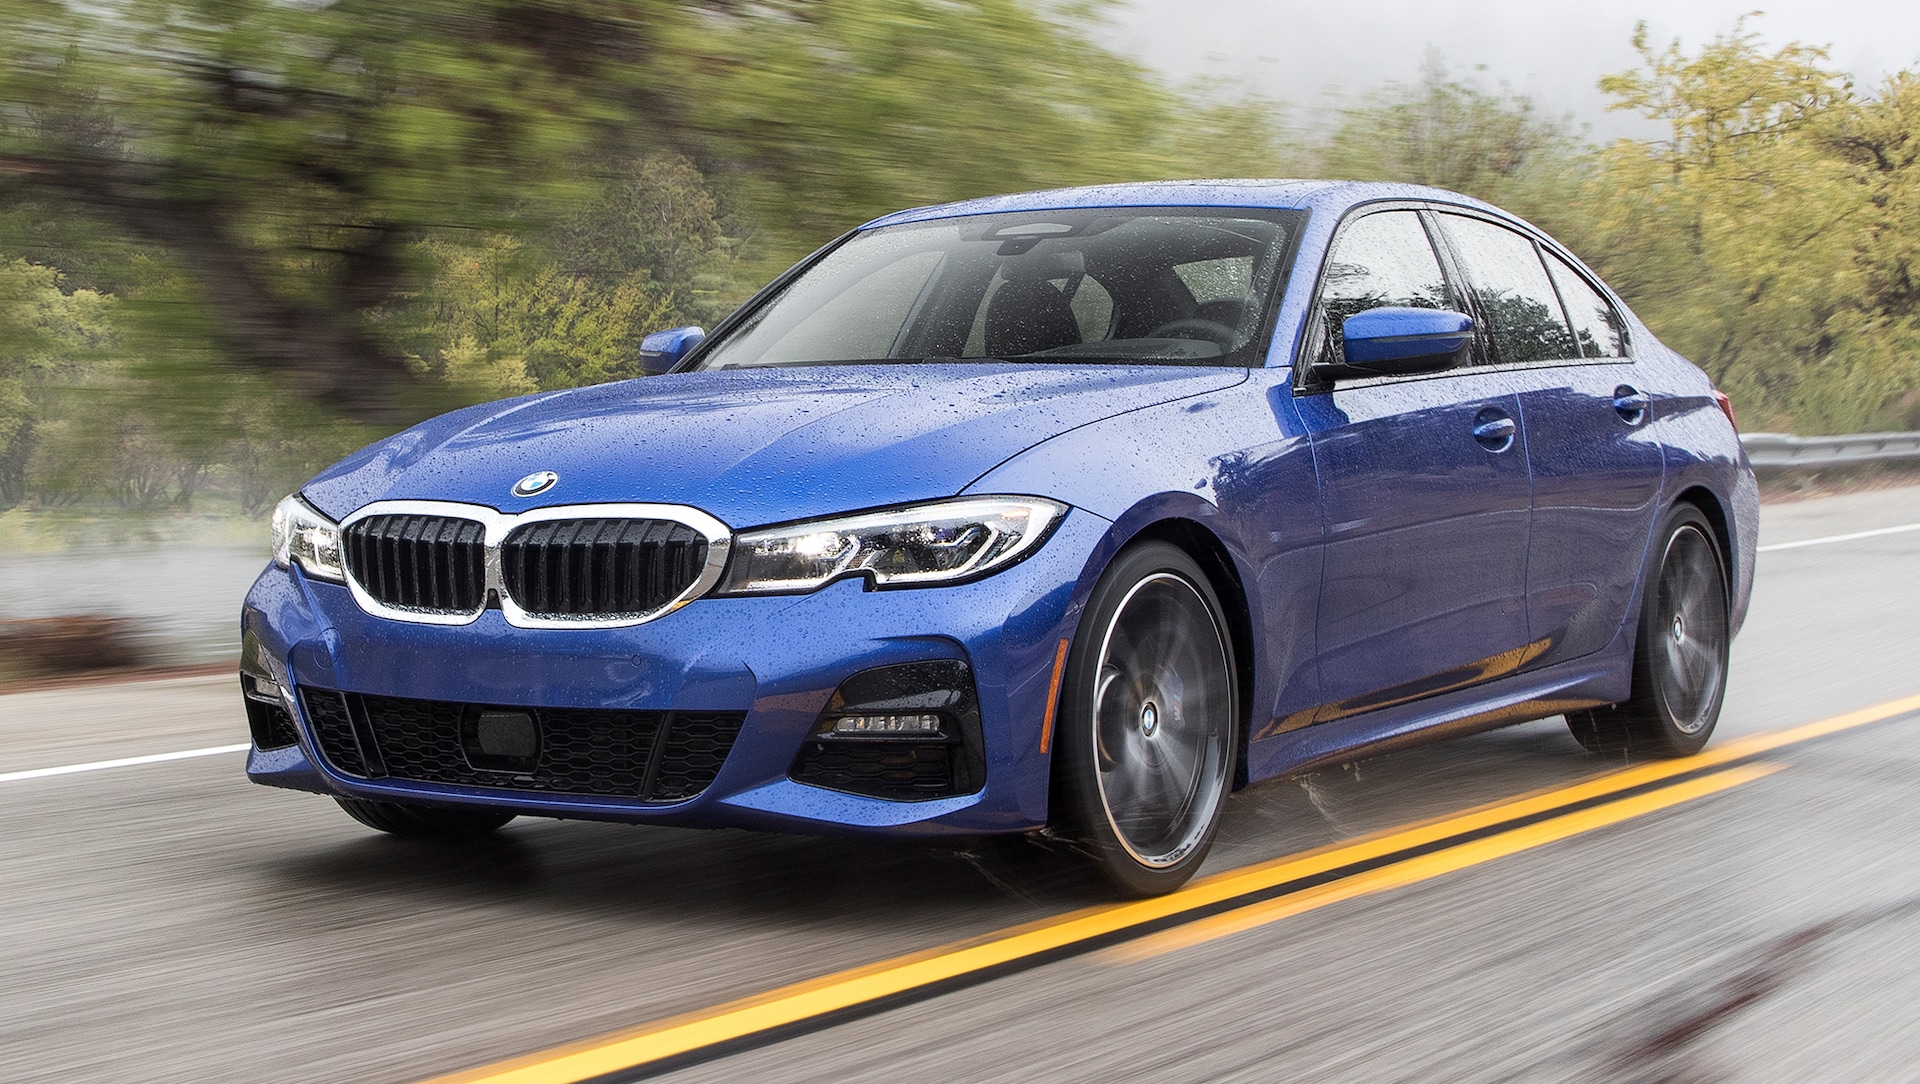 2019 BMW 330i M Sport First Test: More Power, More Fun?